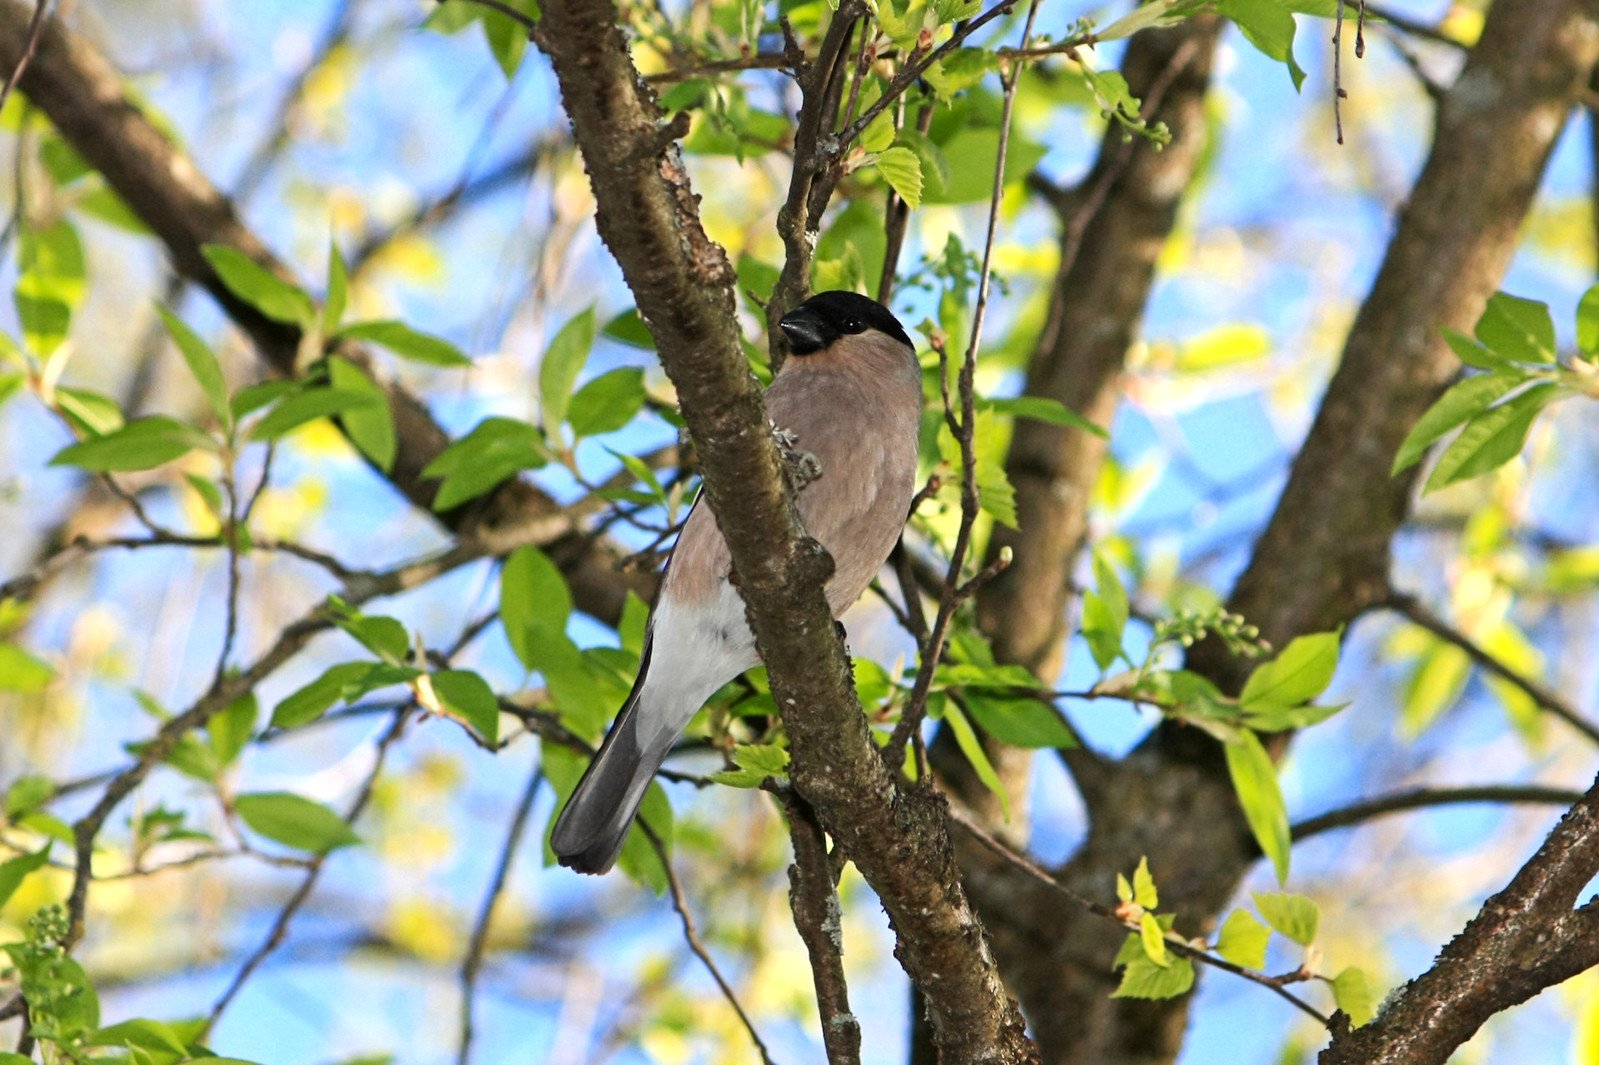 there is a small bird perched on the limb of a tree